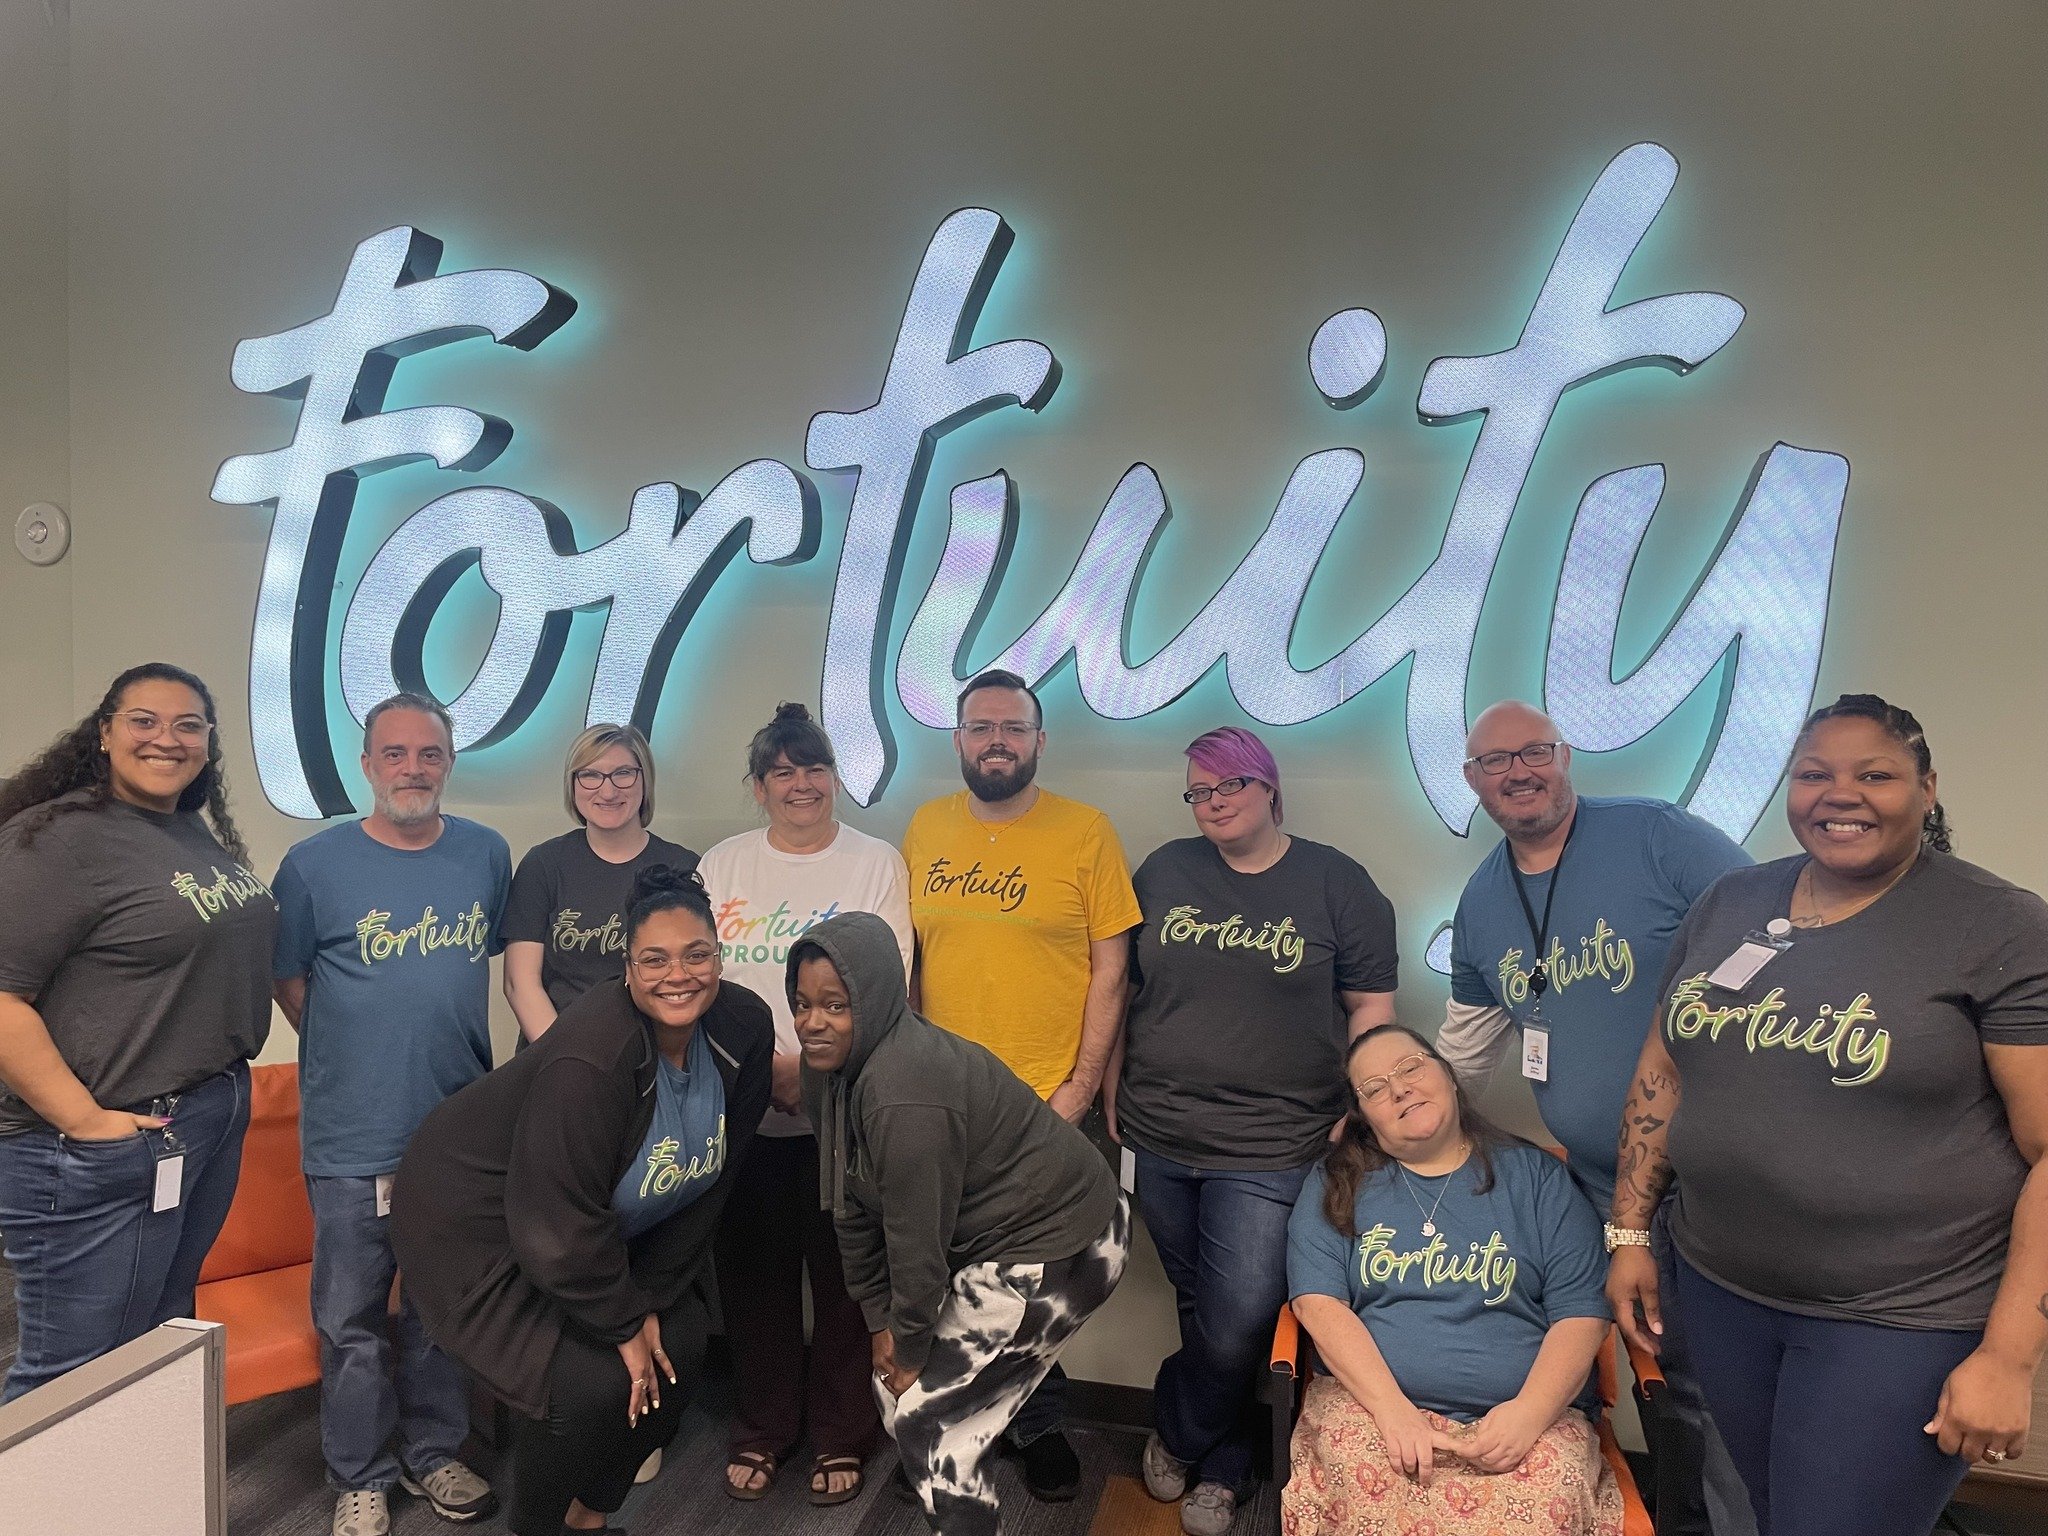 Happy #FortuityShirtFriday! 

Our team had a blast this rainy Friday afternoon, sharing laughs and striking a pose in our awesome Fortuity gear! 

📸 #TeamFortuity #FortuityFam #FortuityShirtFriday #FridayVibes